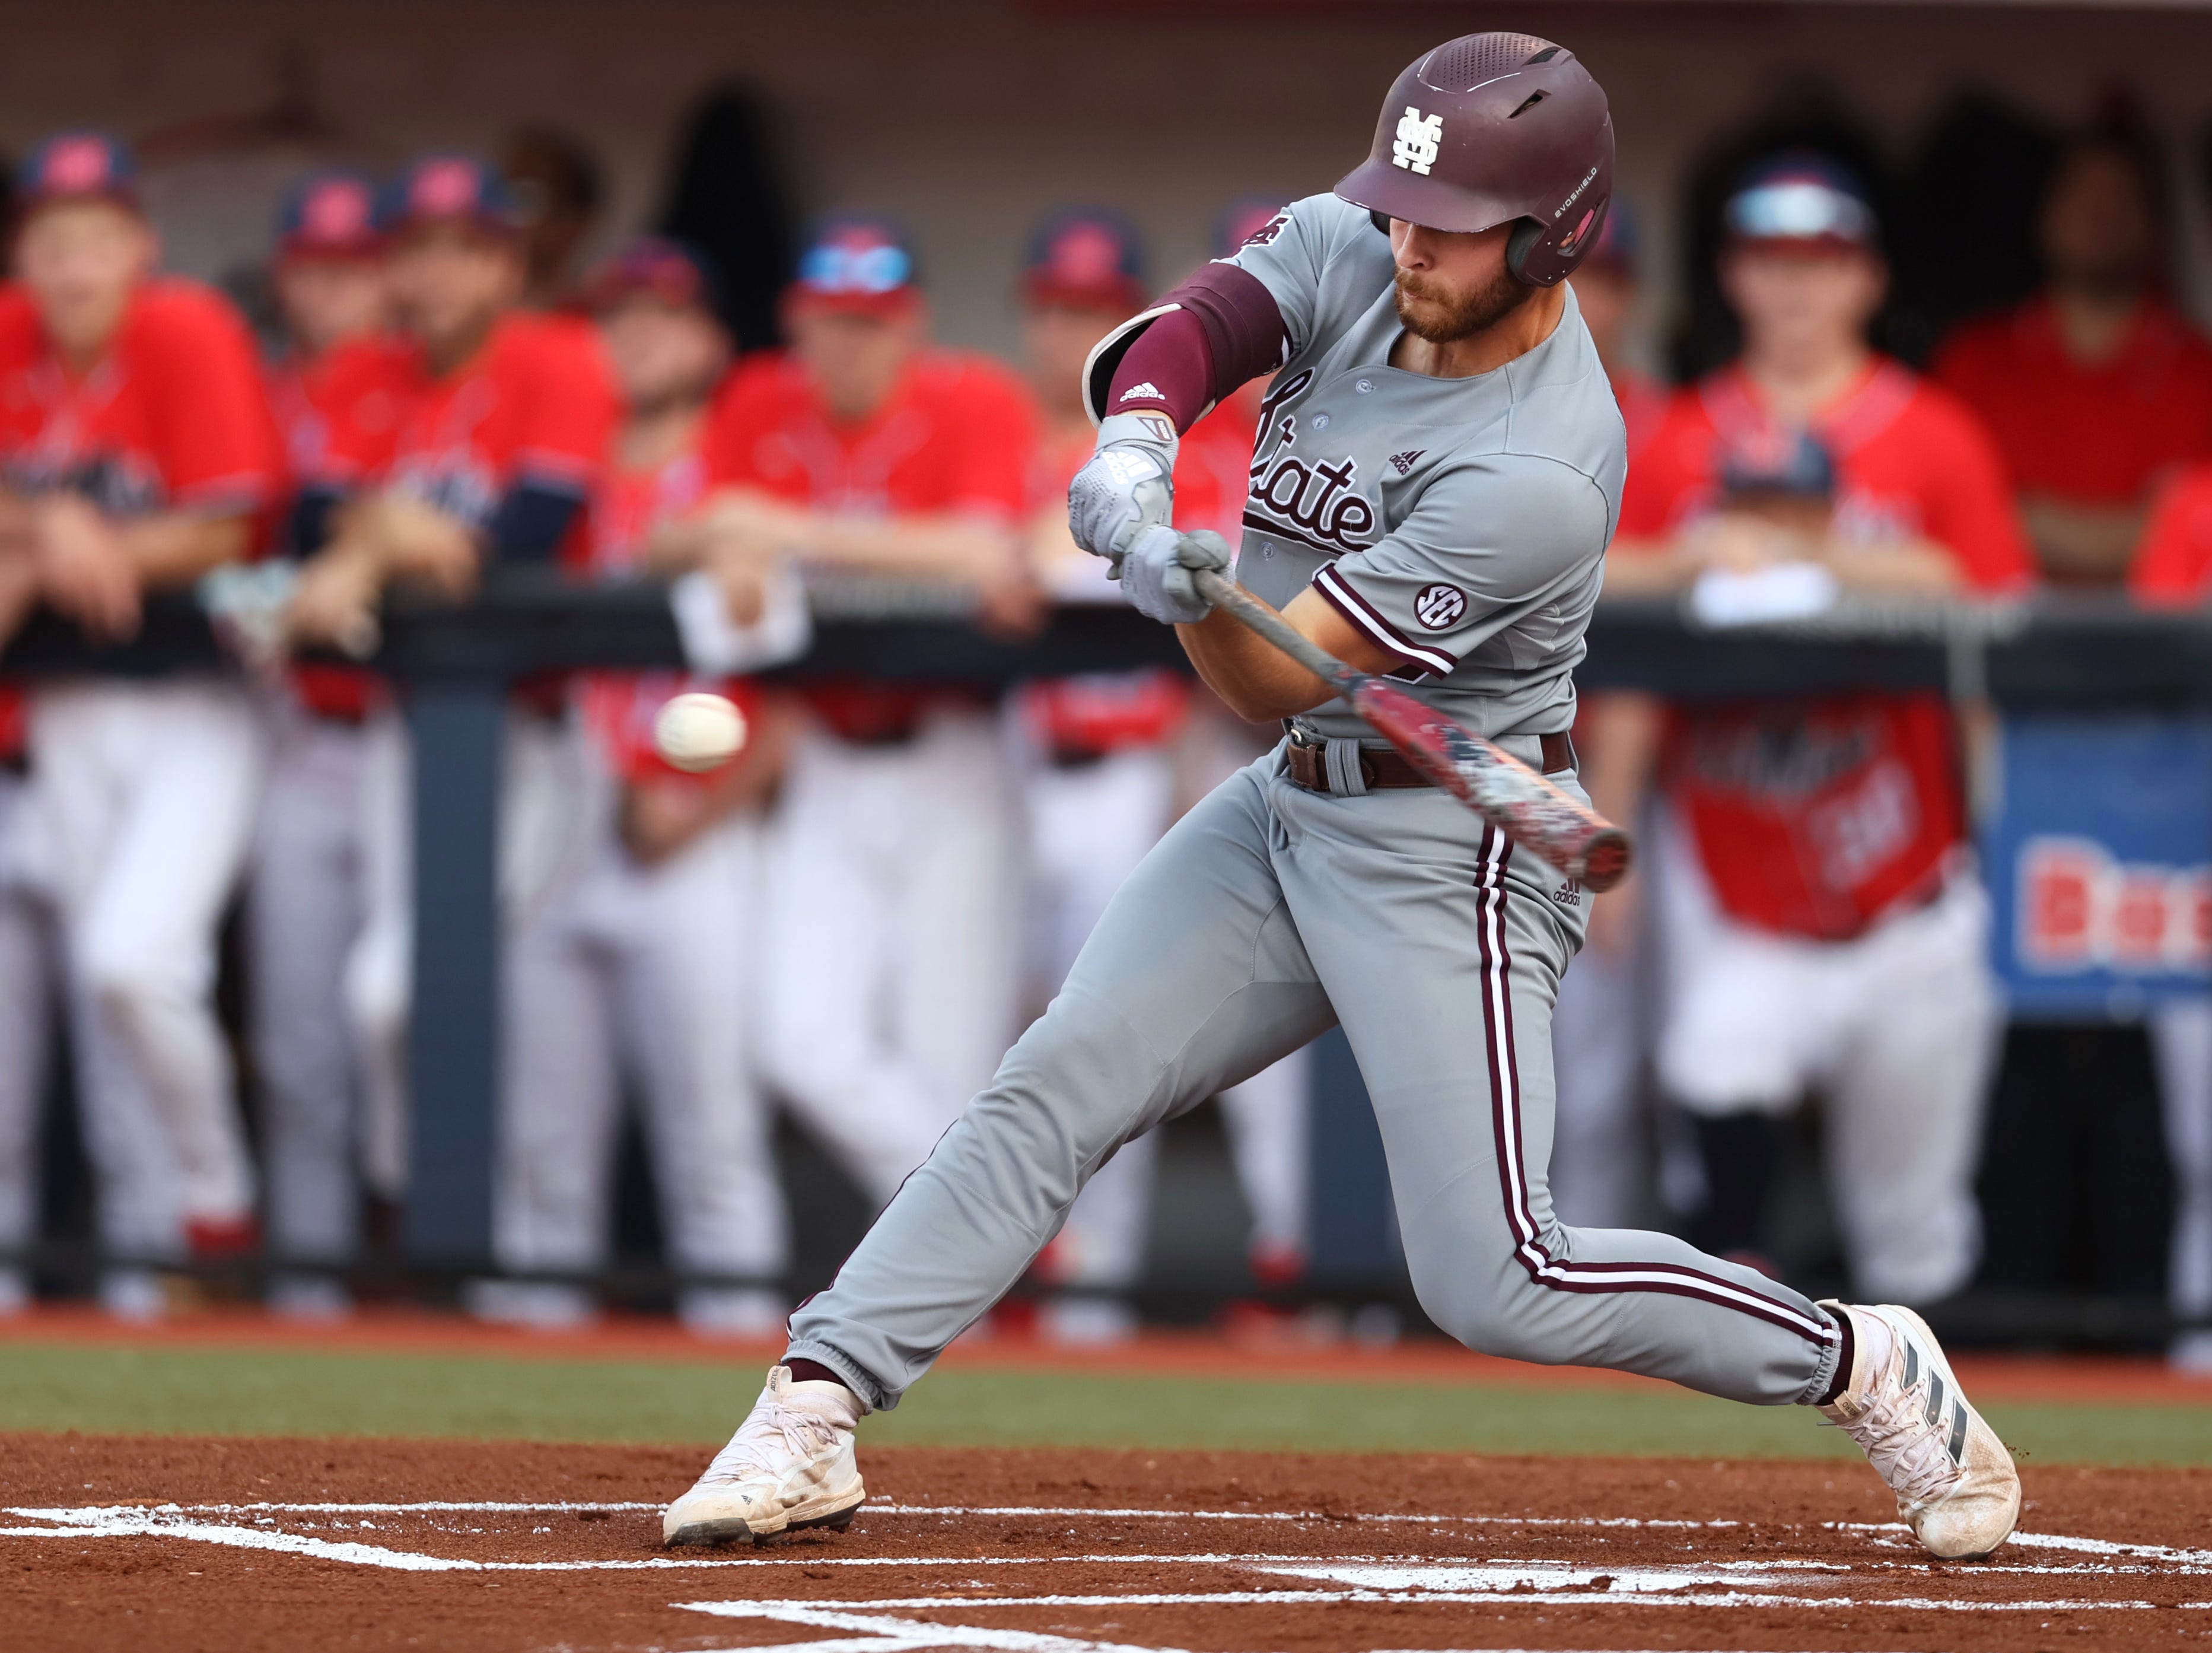 South Carolina at Mississippi State Live Stream College Baseball How